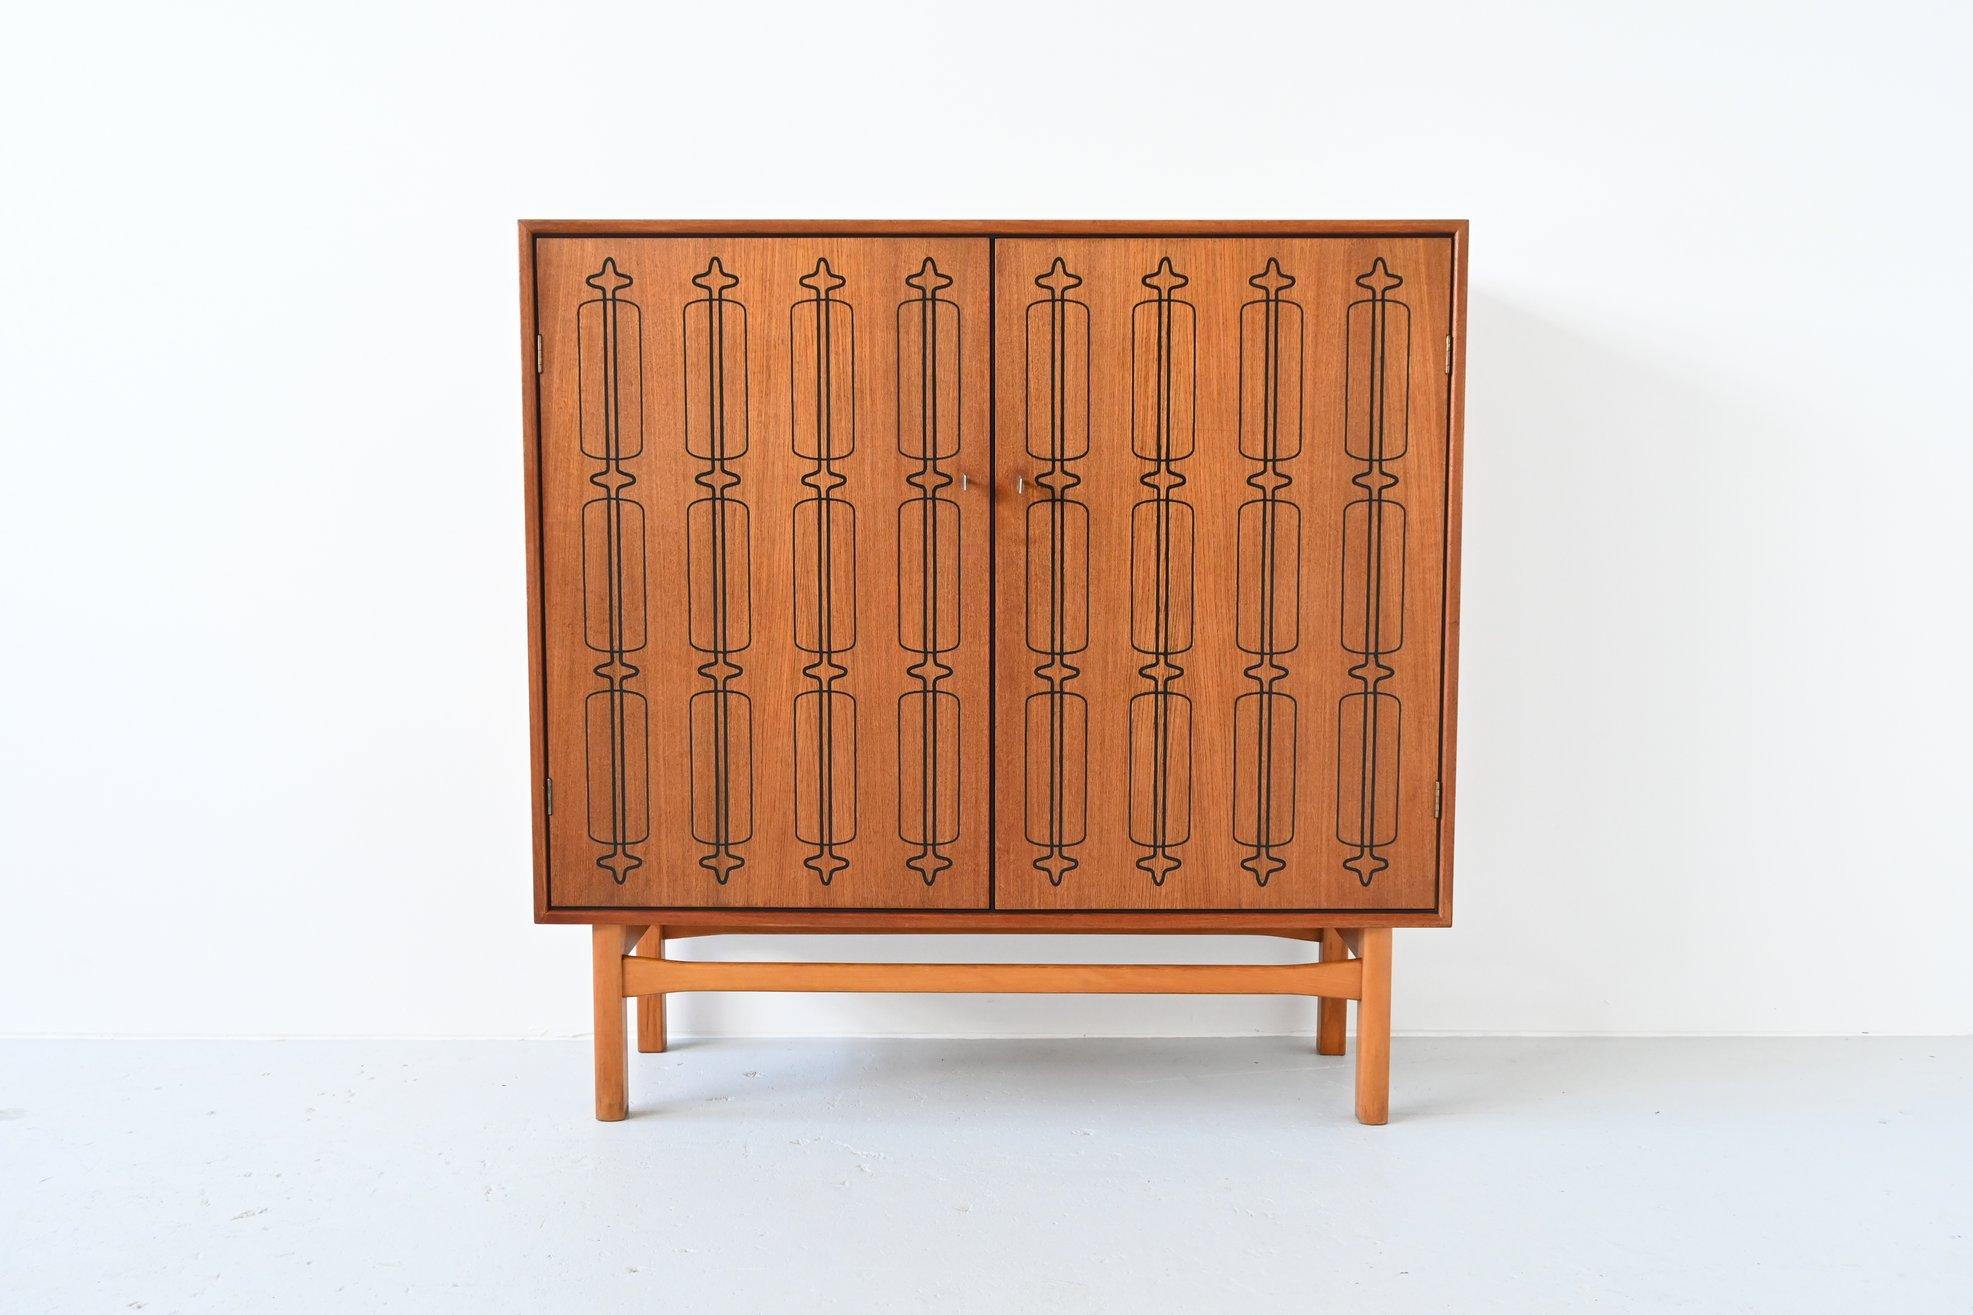 Beautiful and unique Scandinavian cabinet, Denmark 1960. This very nice unusual cabinet is made of high quality veneered teak wood with a great graphic pattern on the doors. The base is made of solid beech wood. Inside this cabinet there is a plenty